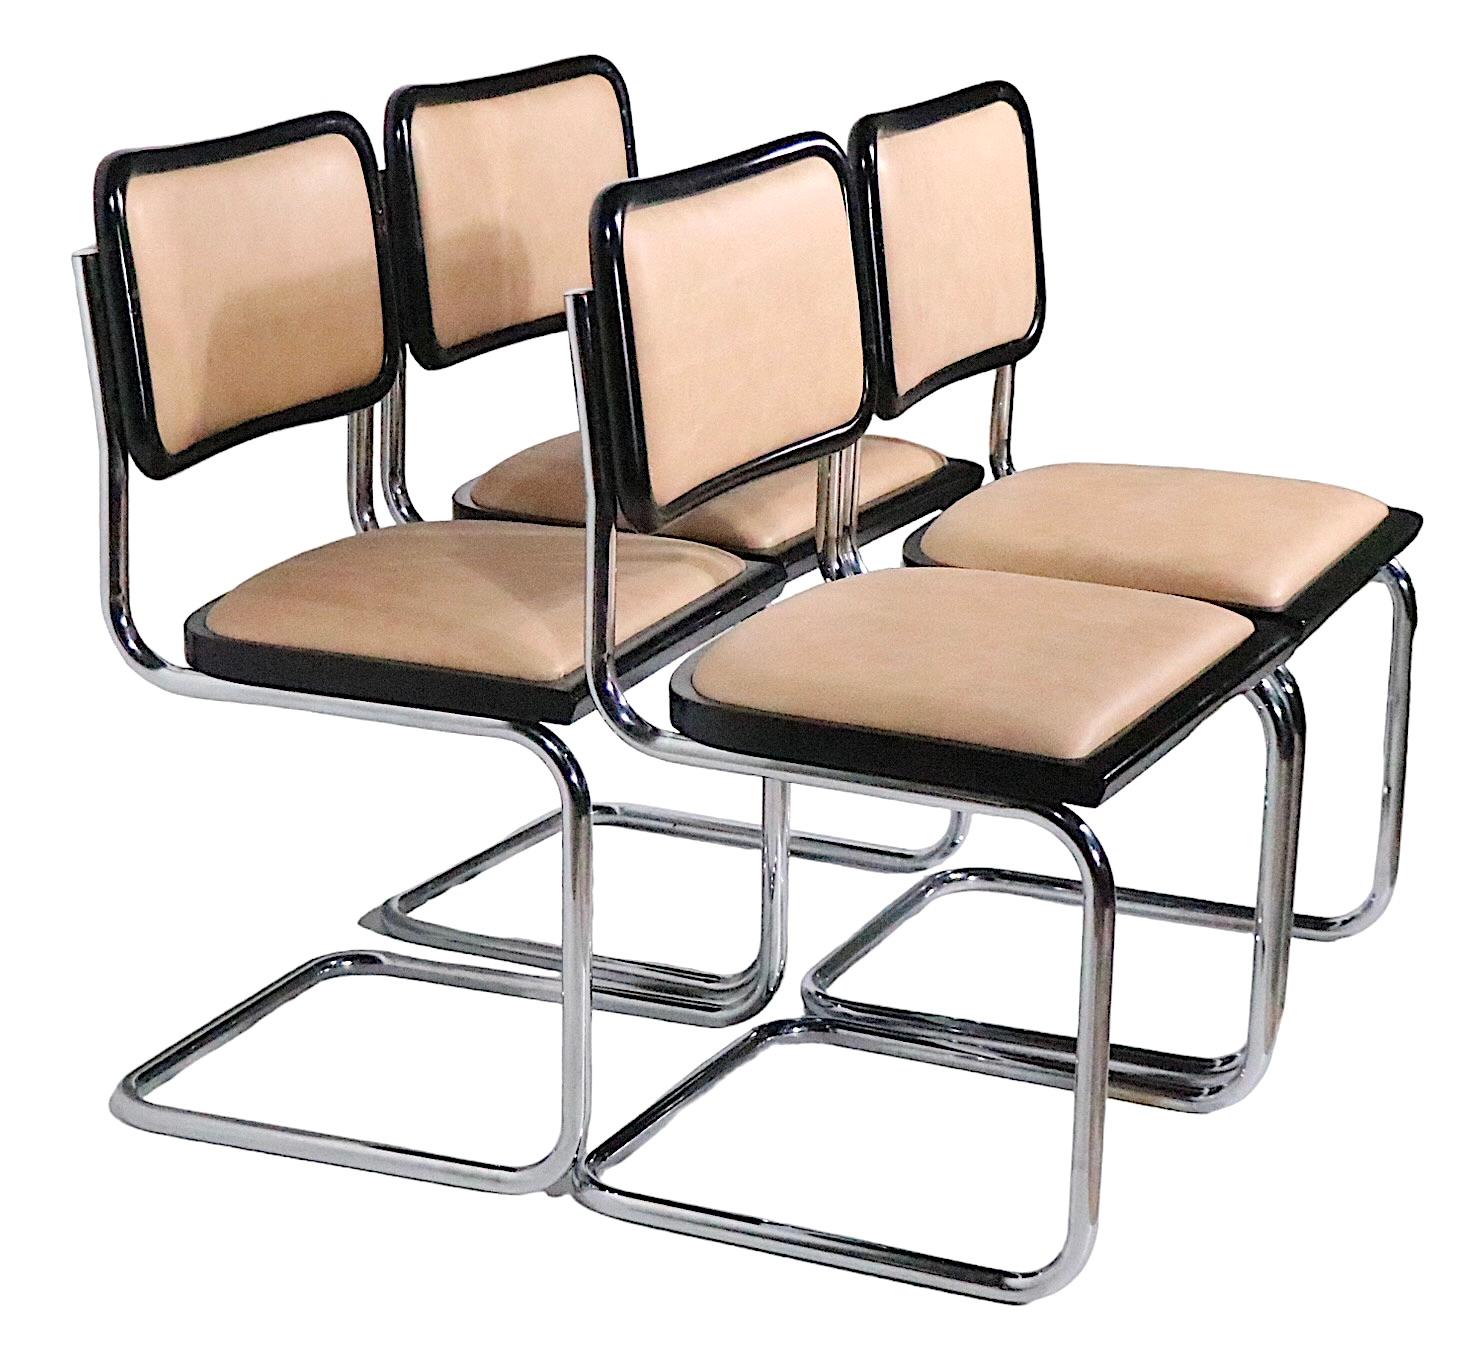 Bauhaus Set of Four Cesca Chairs Made in Italy Designed by Breuer c. 1970s For Sale